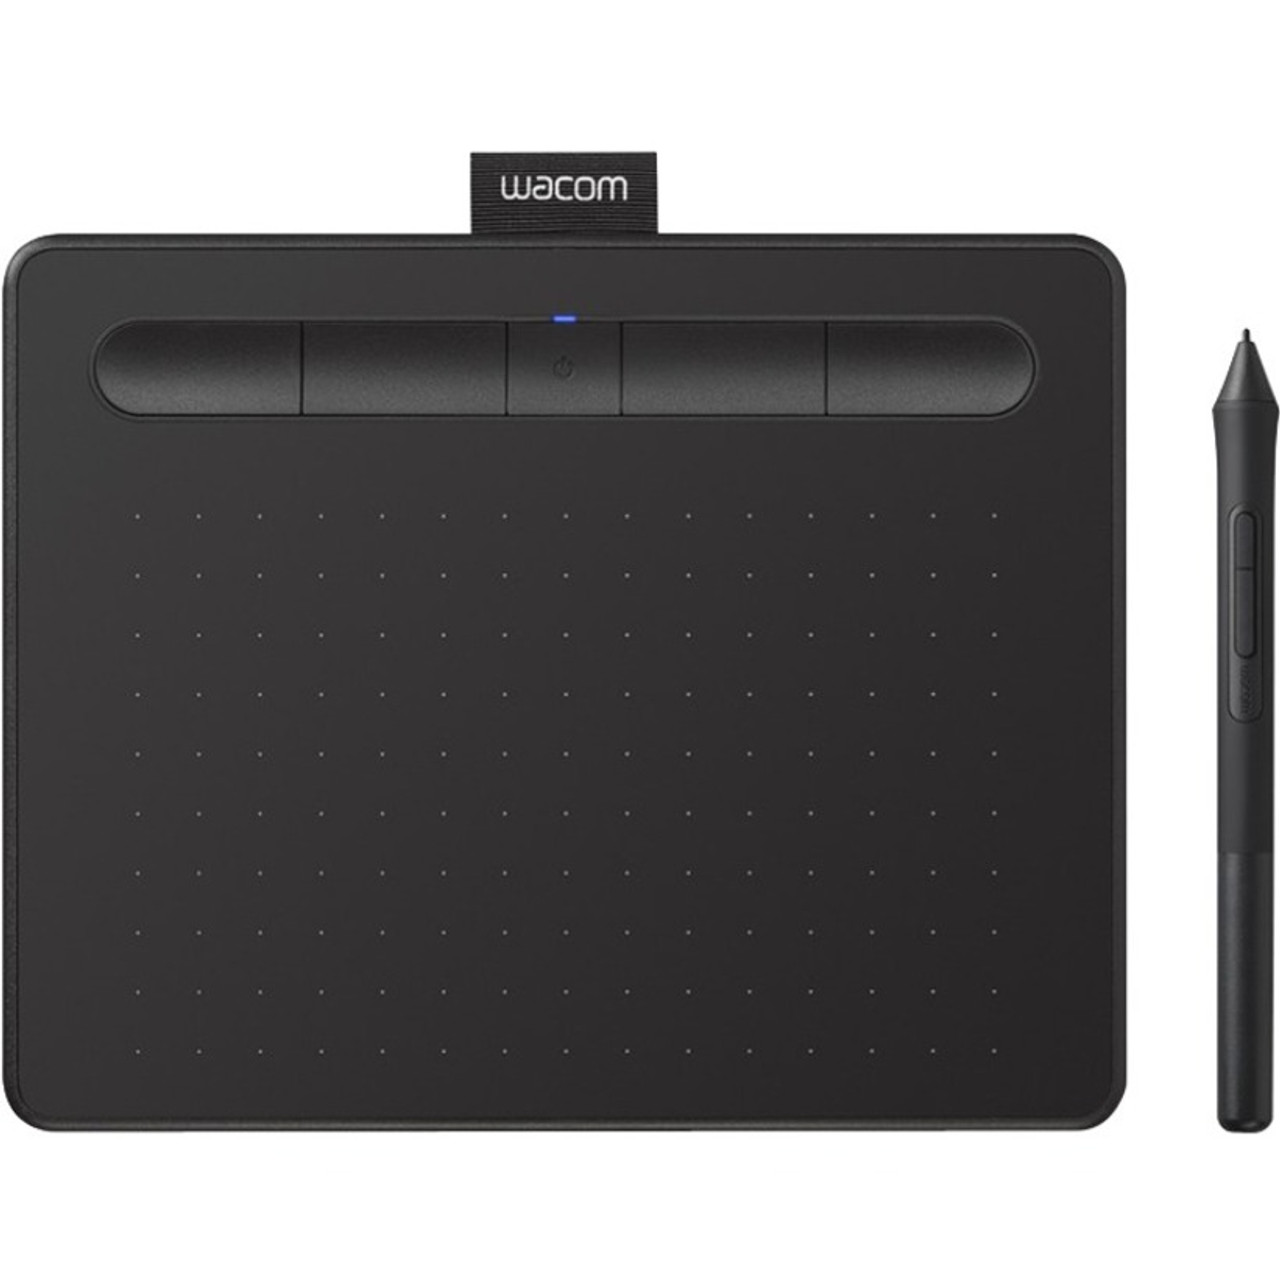 Wacom Intuos Wireless Graphics Drawing Tablet for Mac, PC, Chromebook & Android (small) with Software Included - Black - CTL4100WLK0